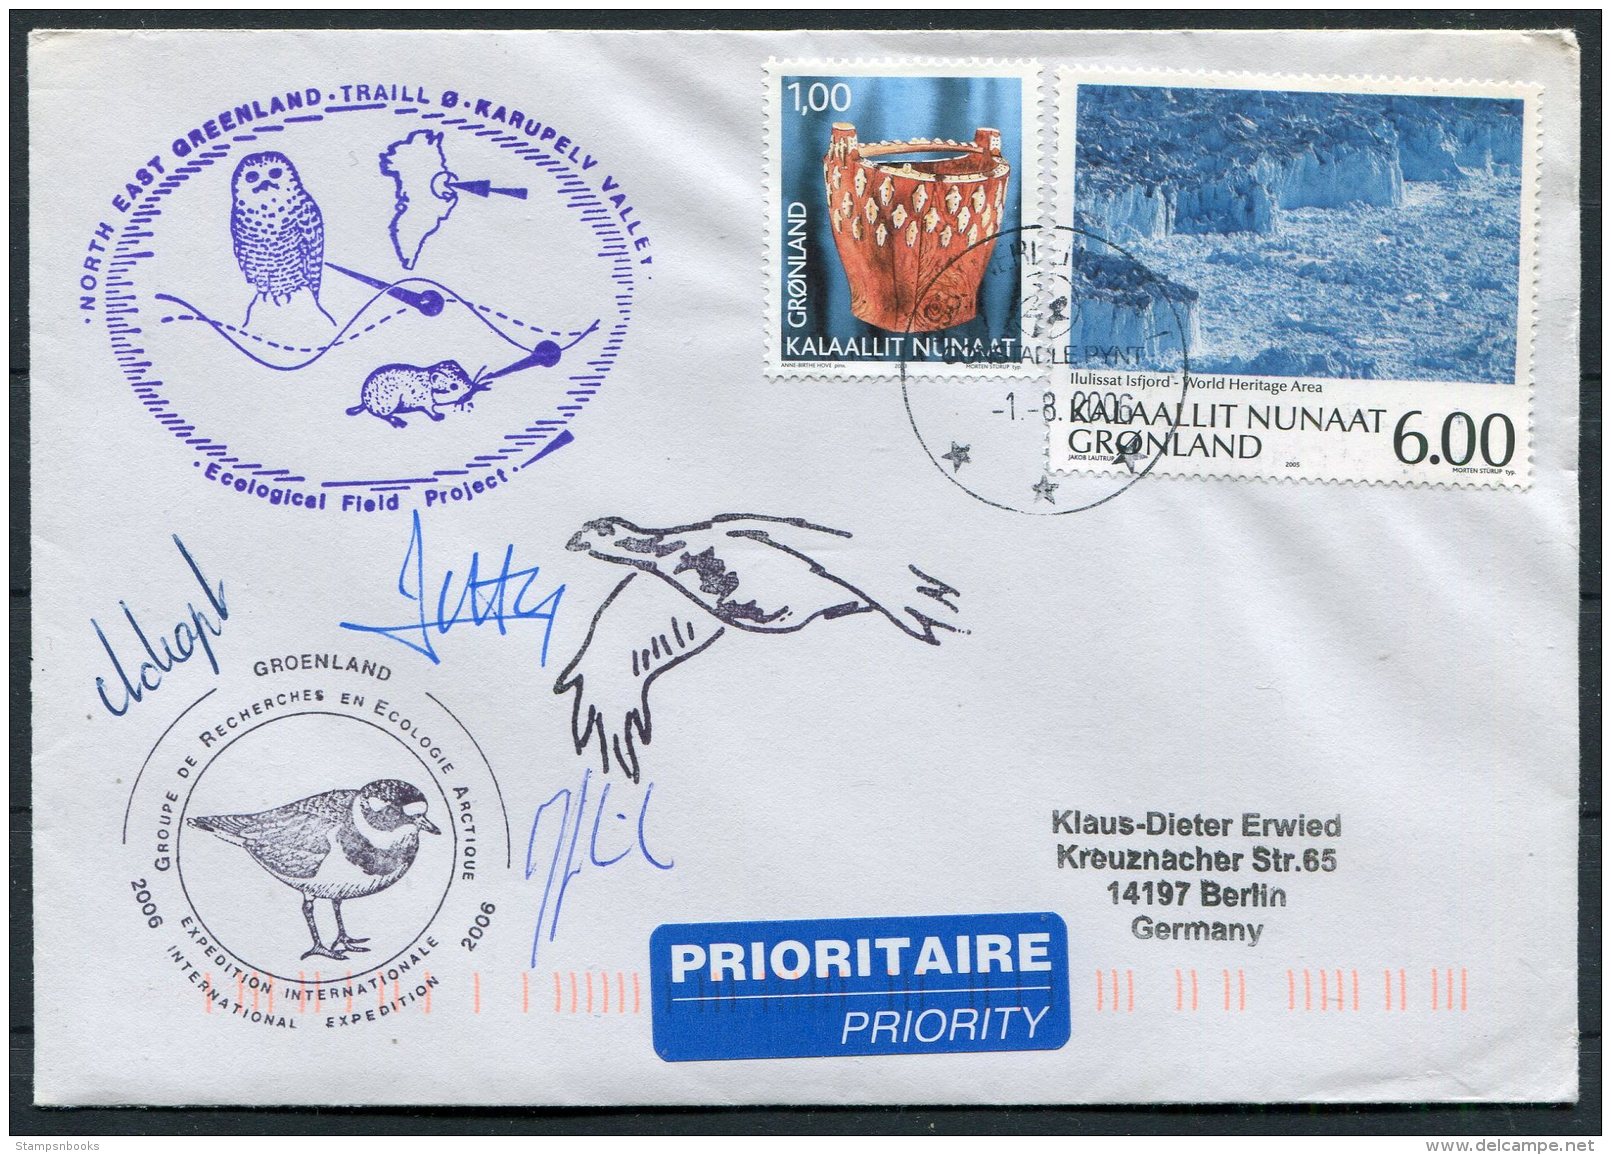 2006 North East Greenland, Karupelv Valley, Polar Owl Birds Research Arctic Expedition Signed Cover - Covers & Documents